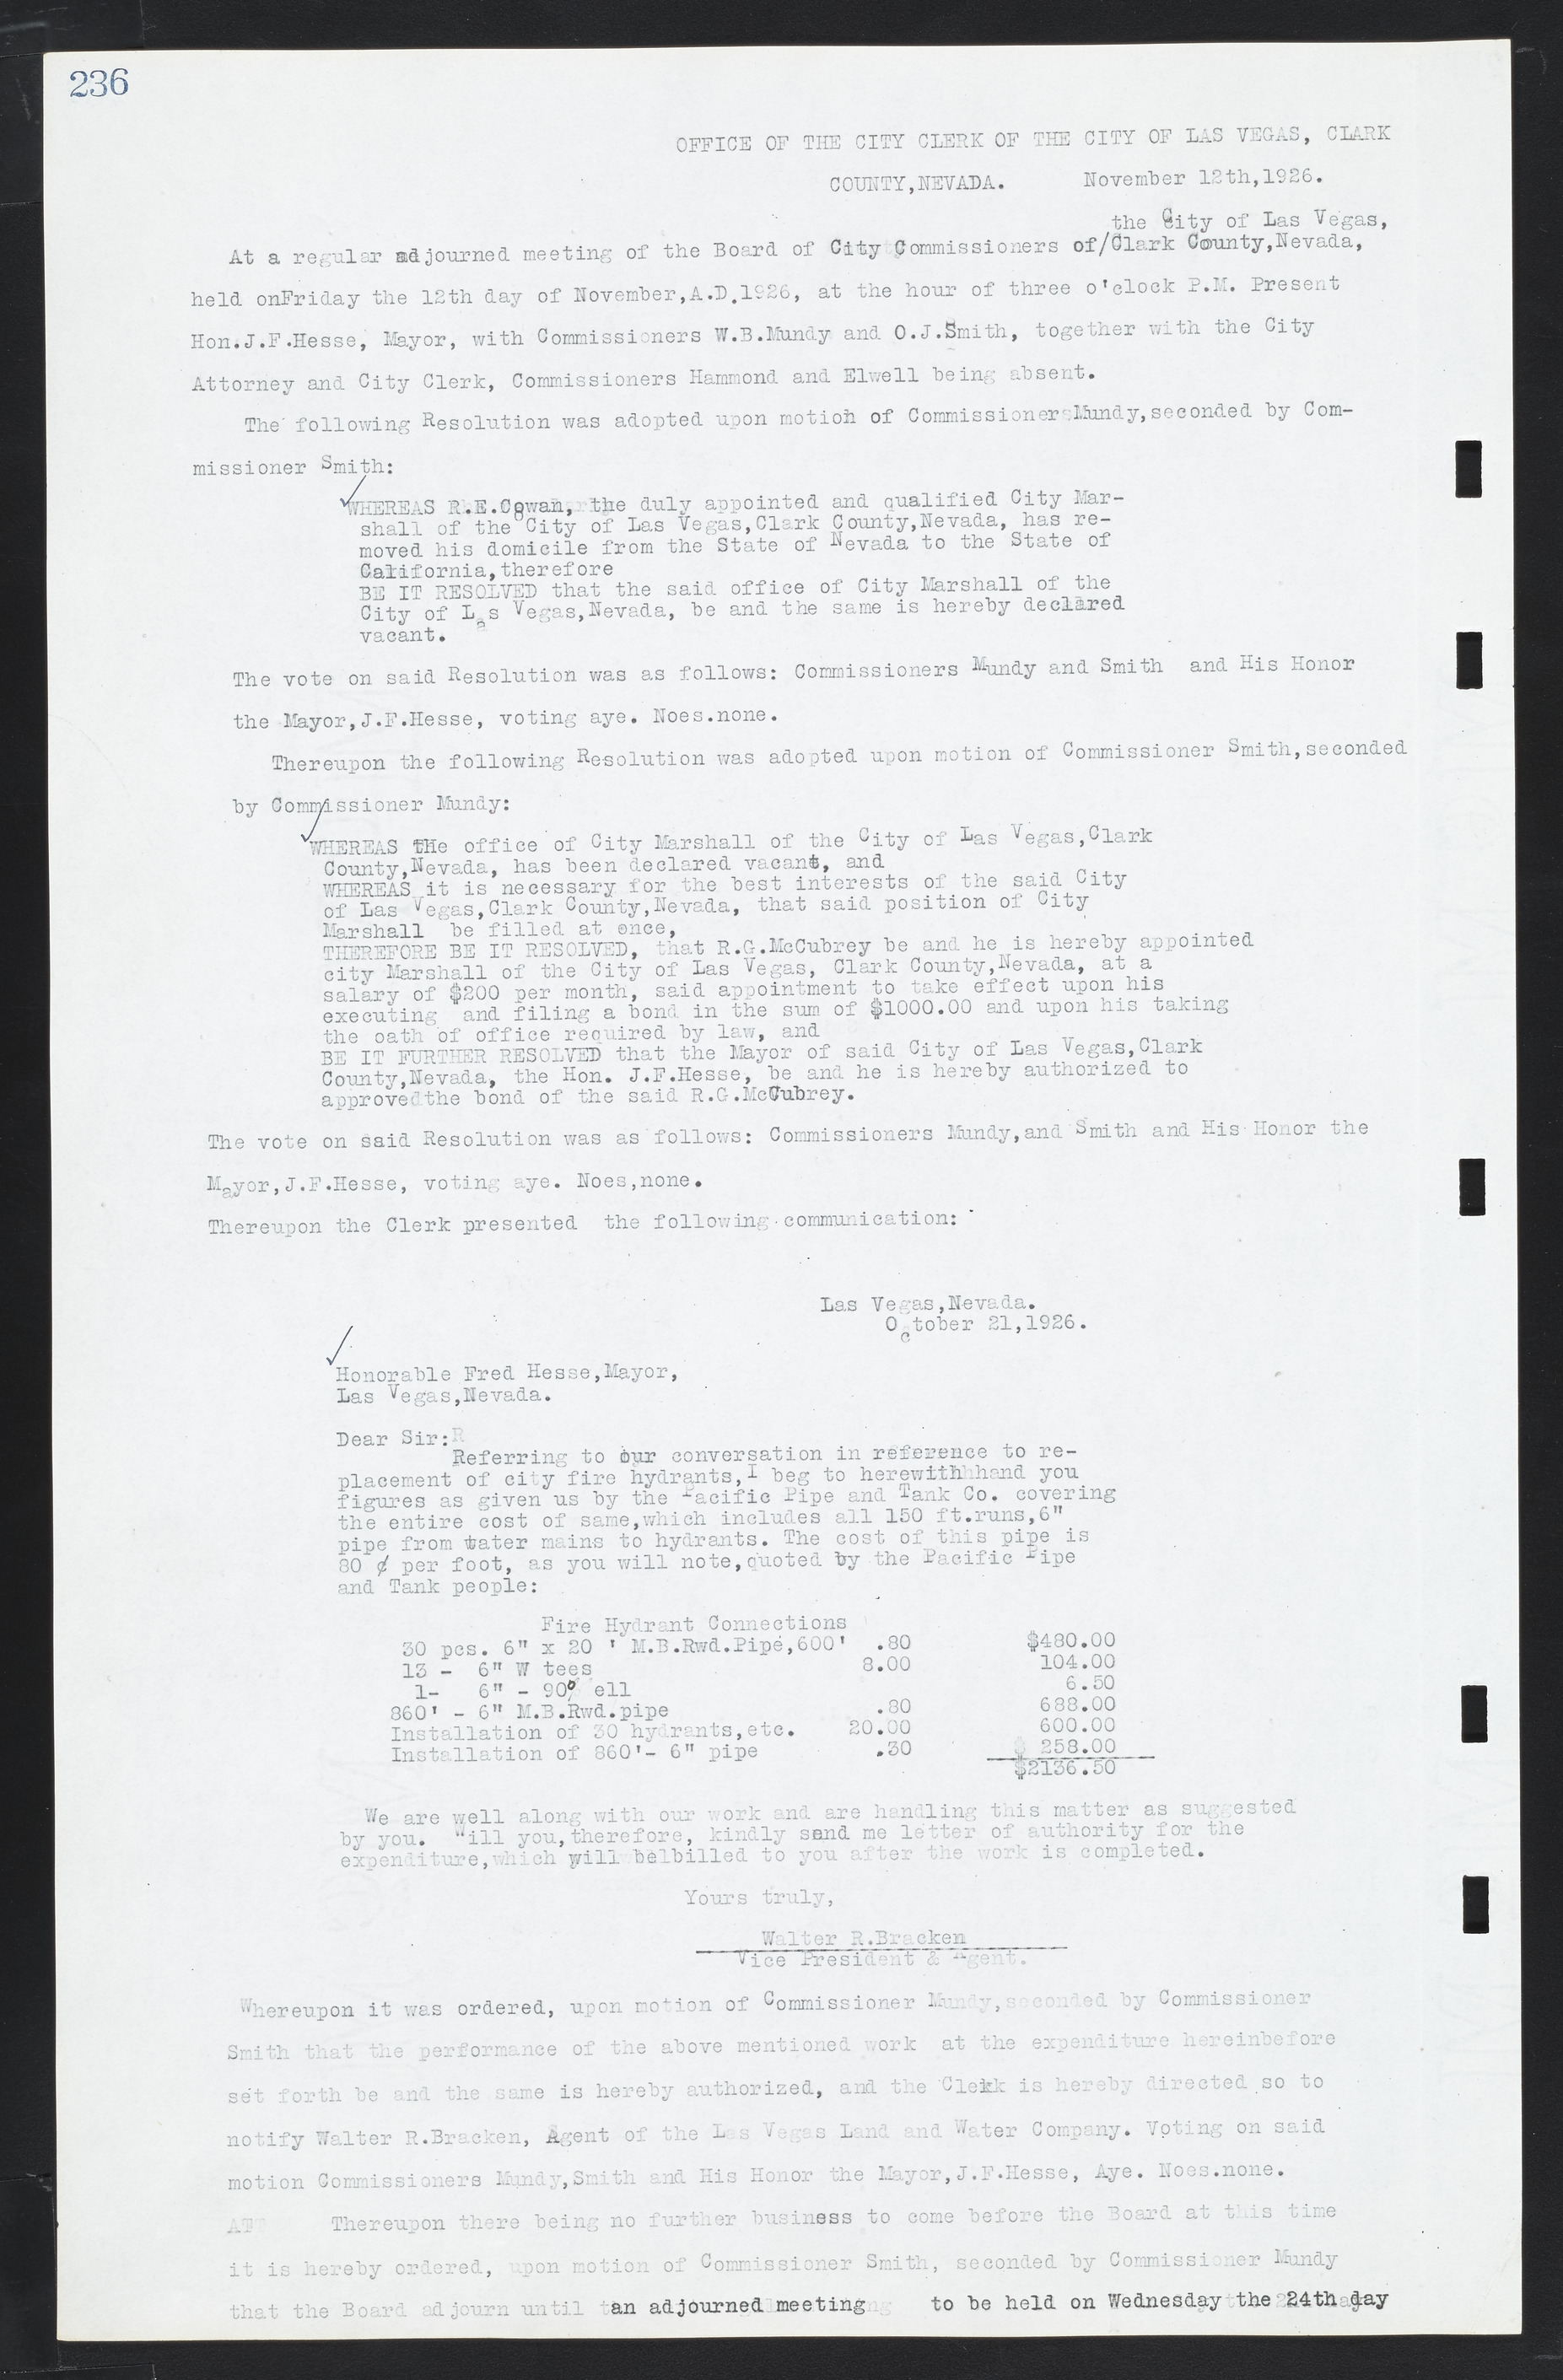 Las Vegas City Commission Minutes, March 1, 1922 to May 10, 1929, lvc000002-243